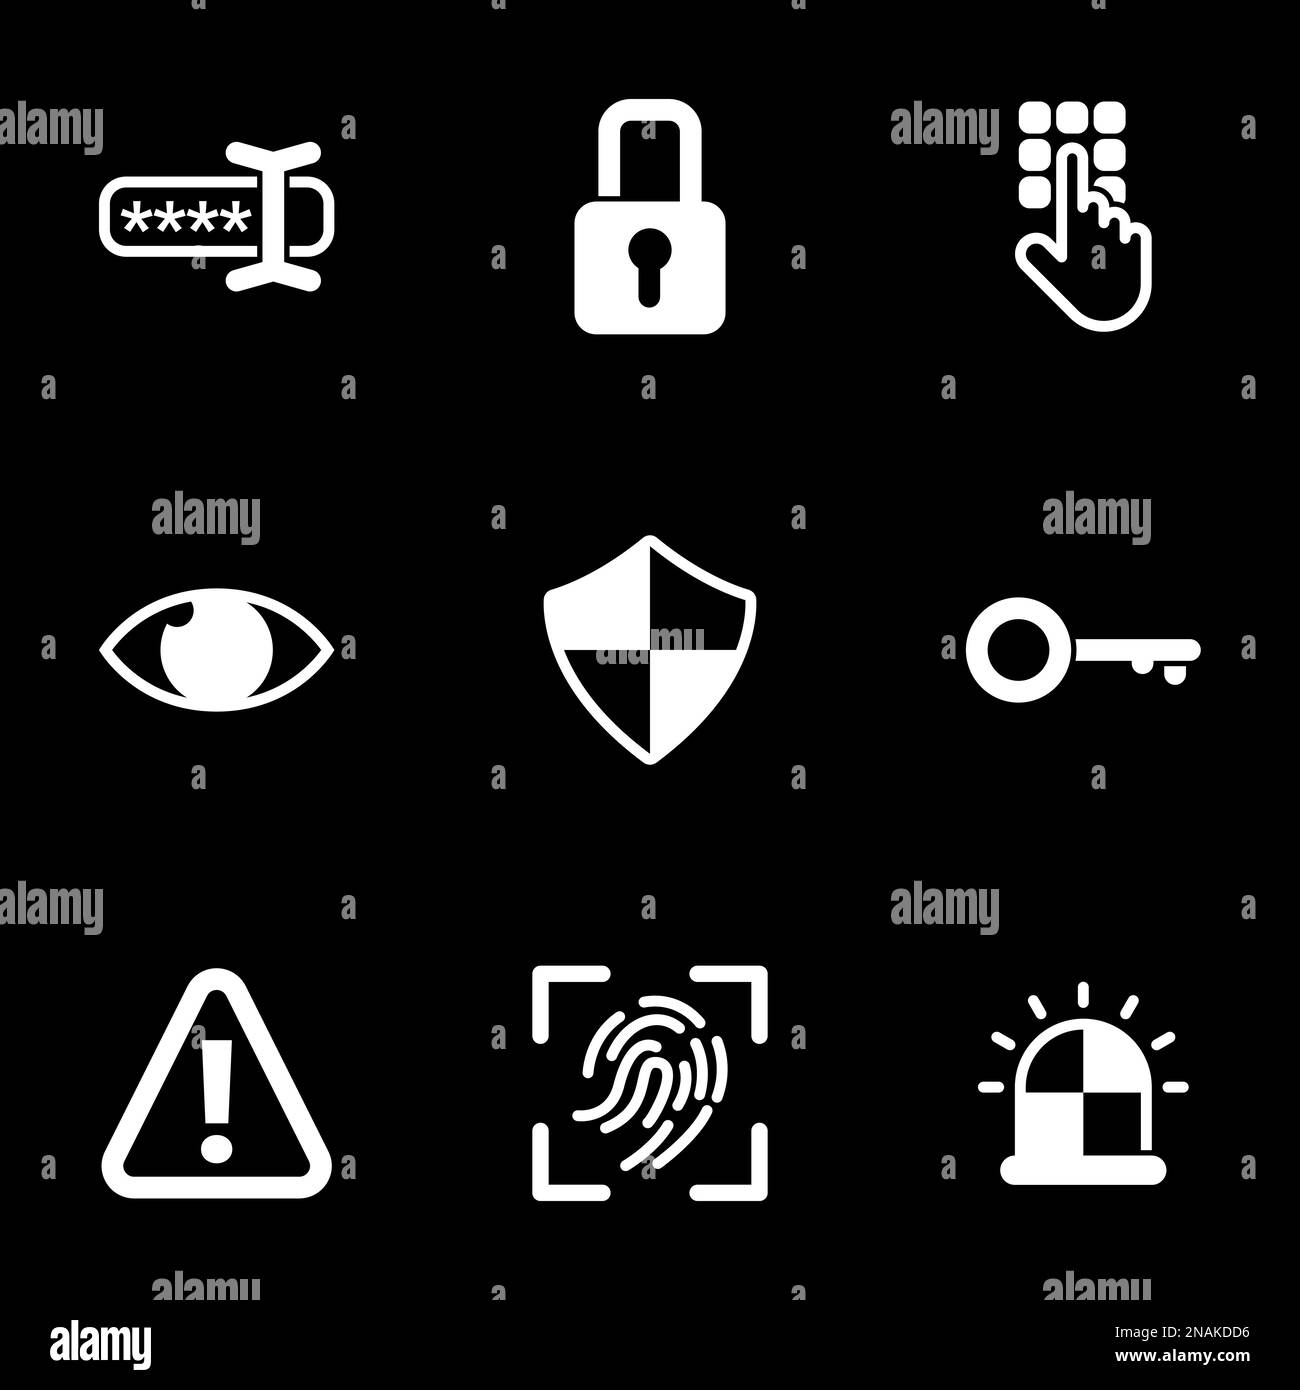 Set of simple icons on a theme Password, authorization, protection, personal data, vector, set. Black background Stock Vector